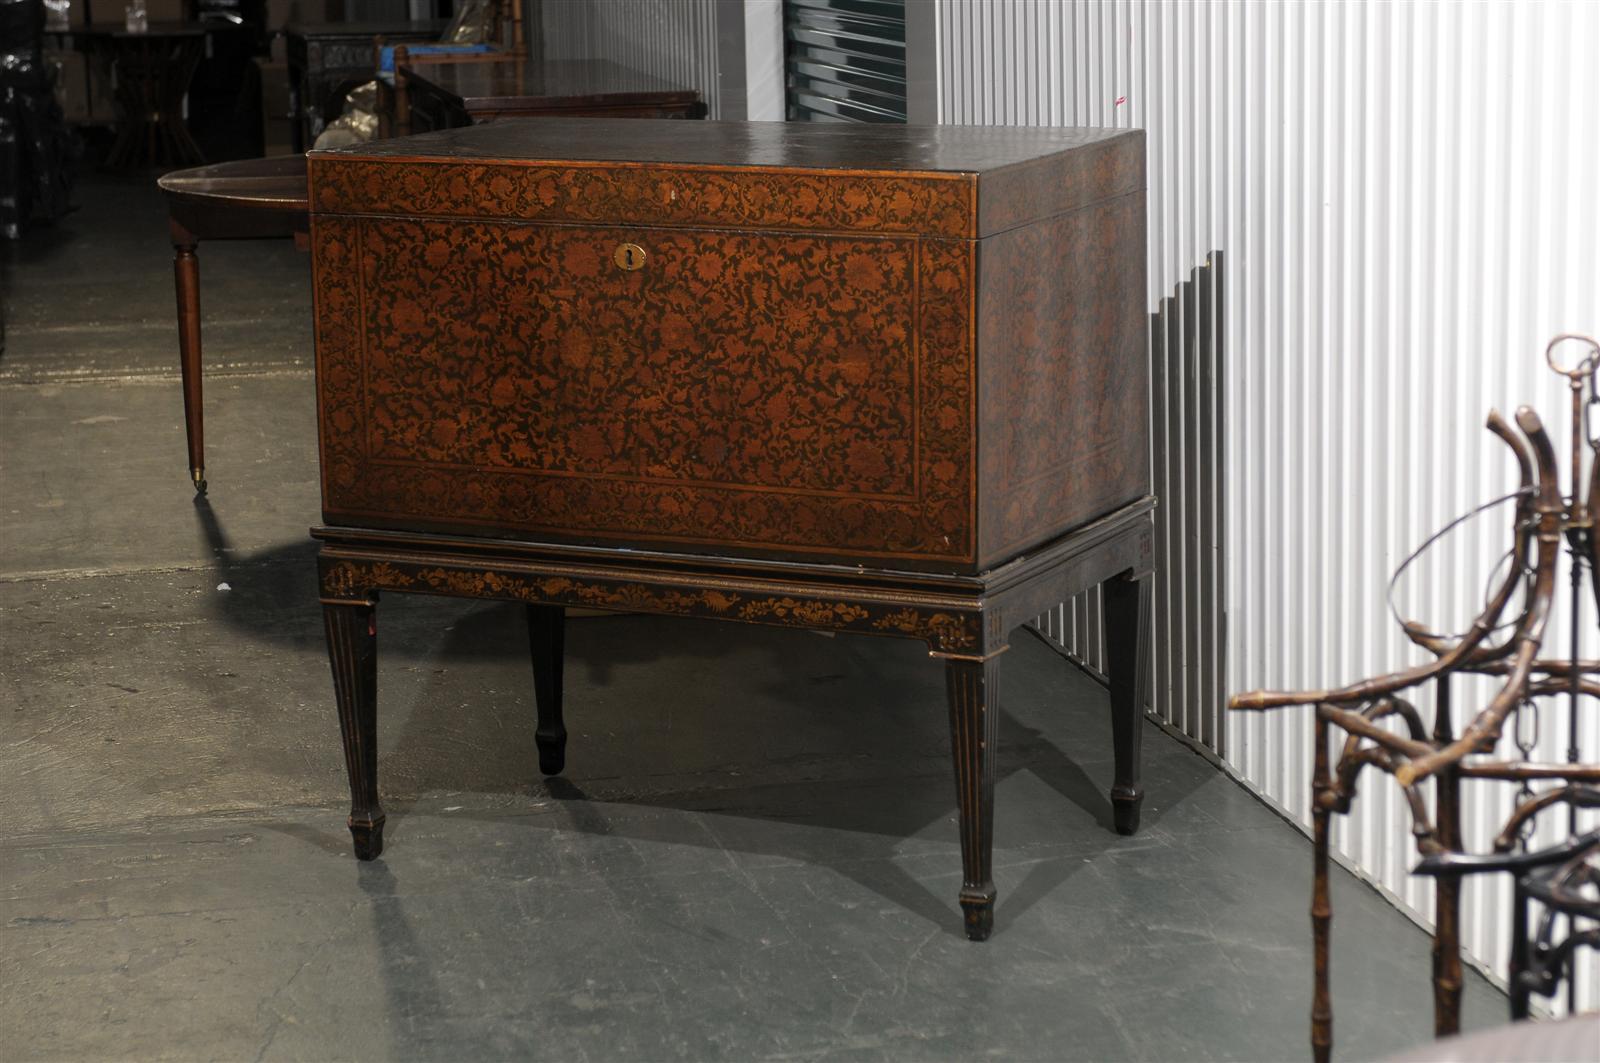 19th century English penwork coffer trunk
Trunk can be removed from stand
Incredible detail with fluted leg, spade foot
Overall dimensions: 43.5